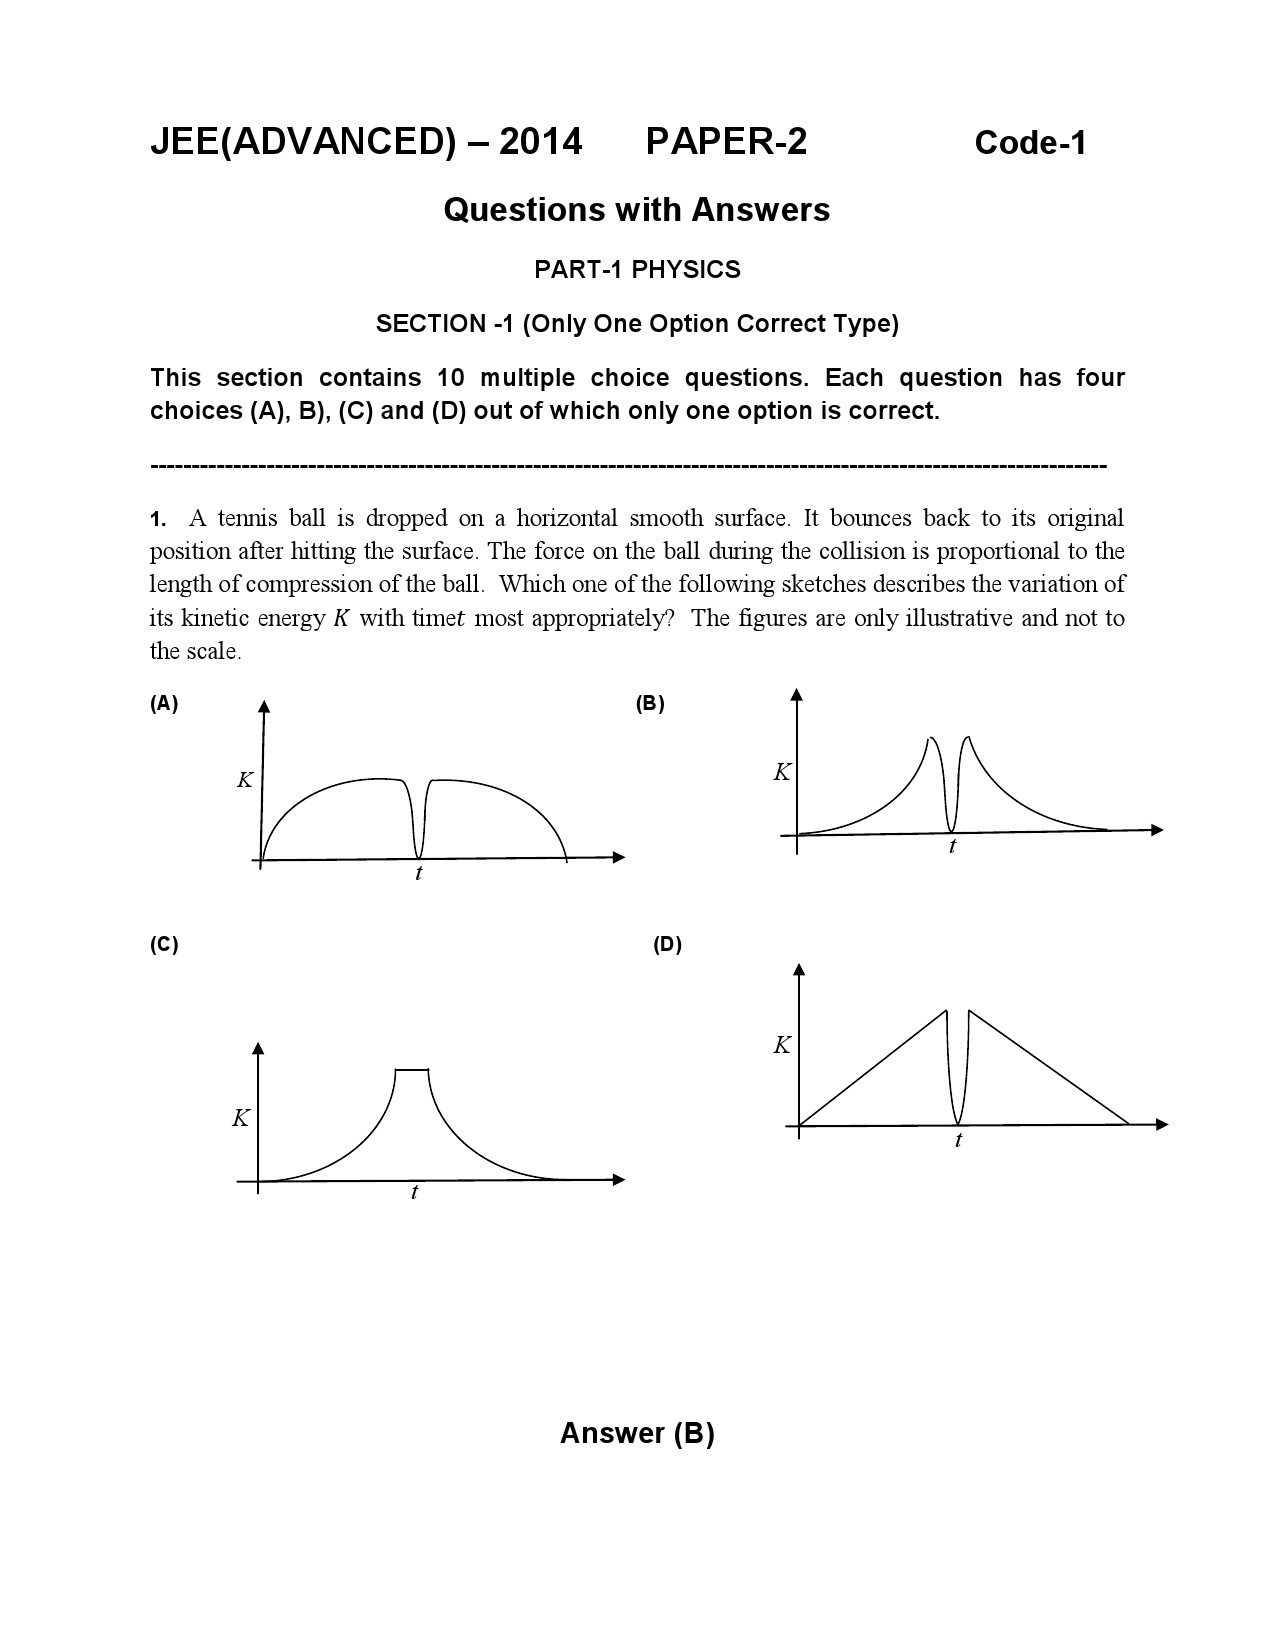 JEE Advanced Exam Question Paper 2014 Paper 2 Physics 1